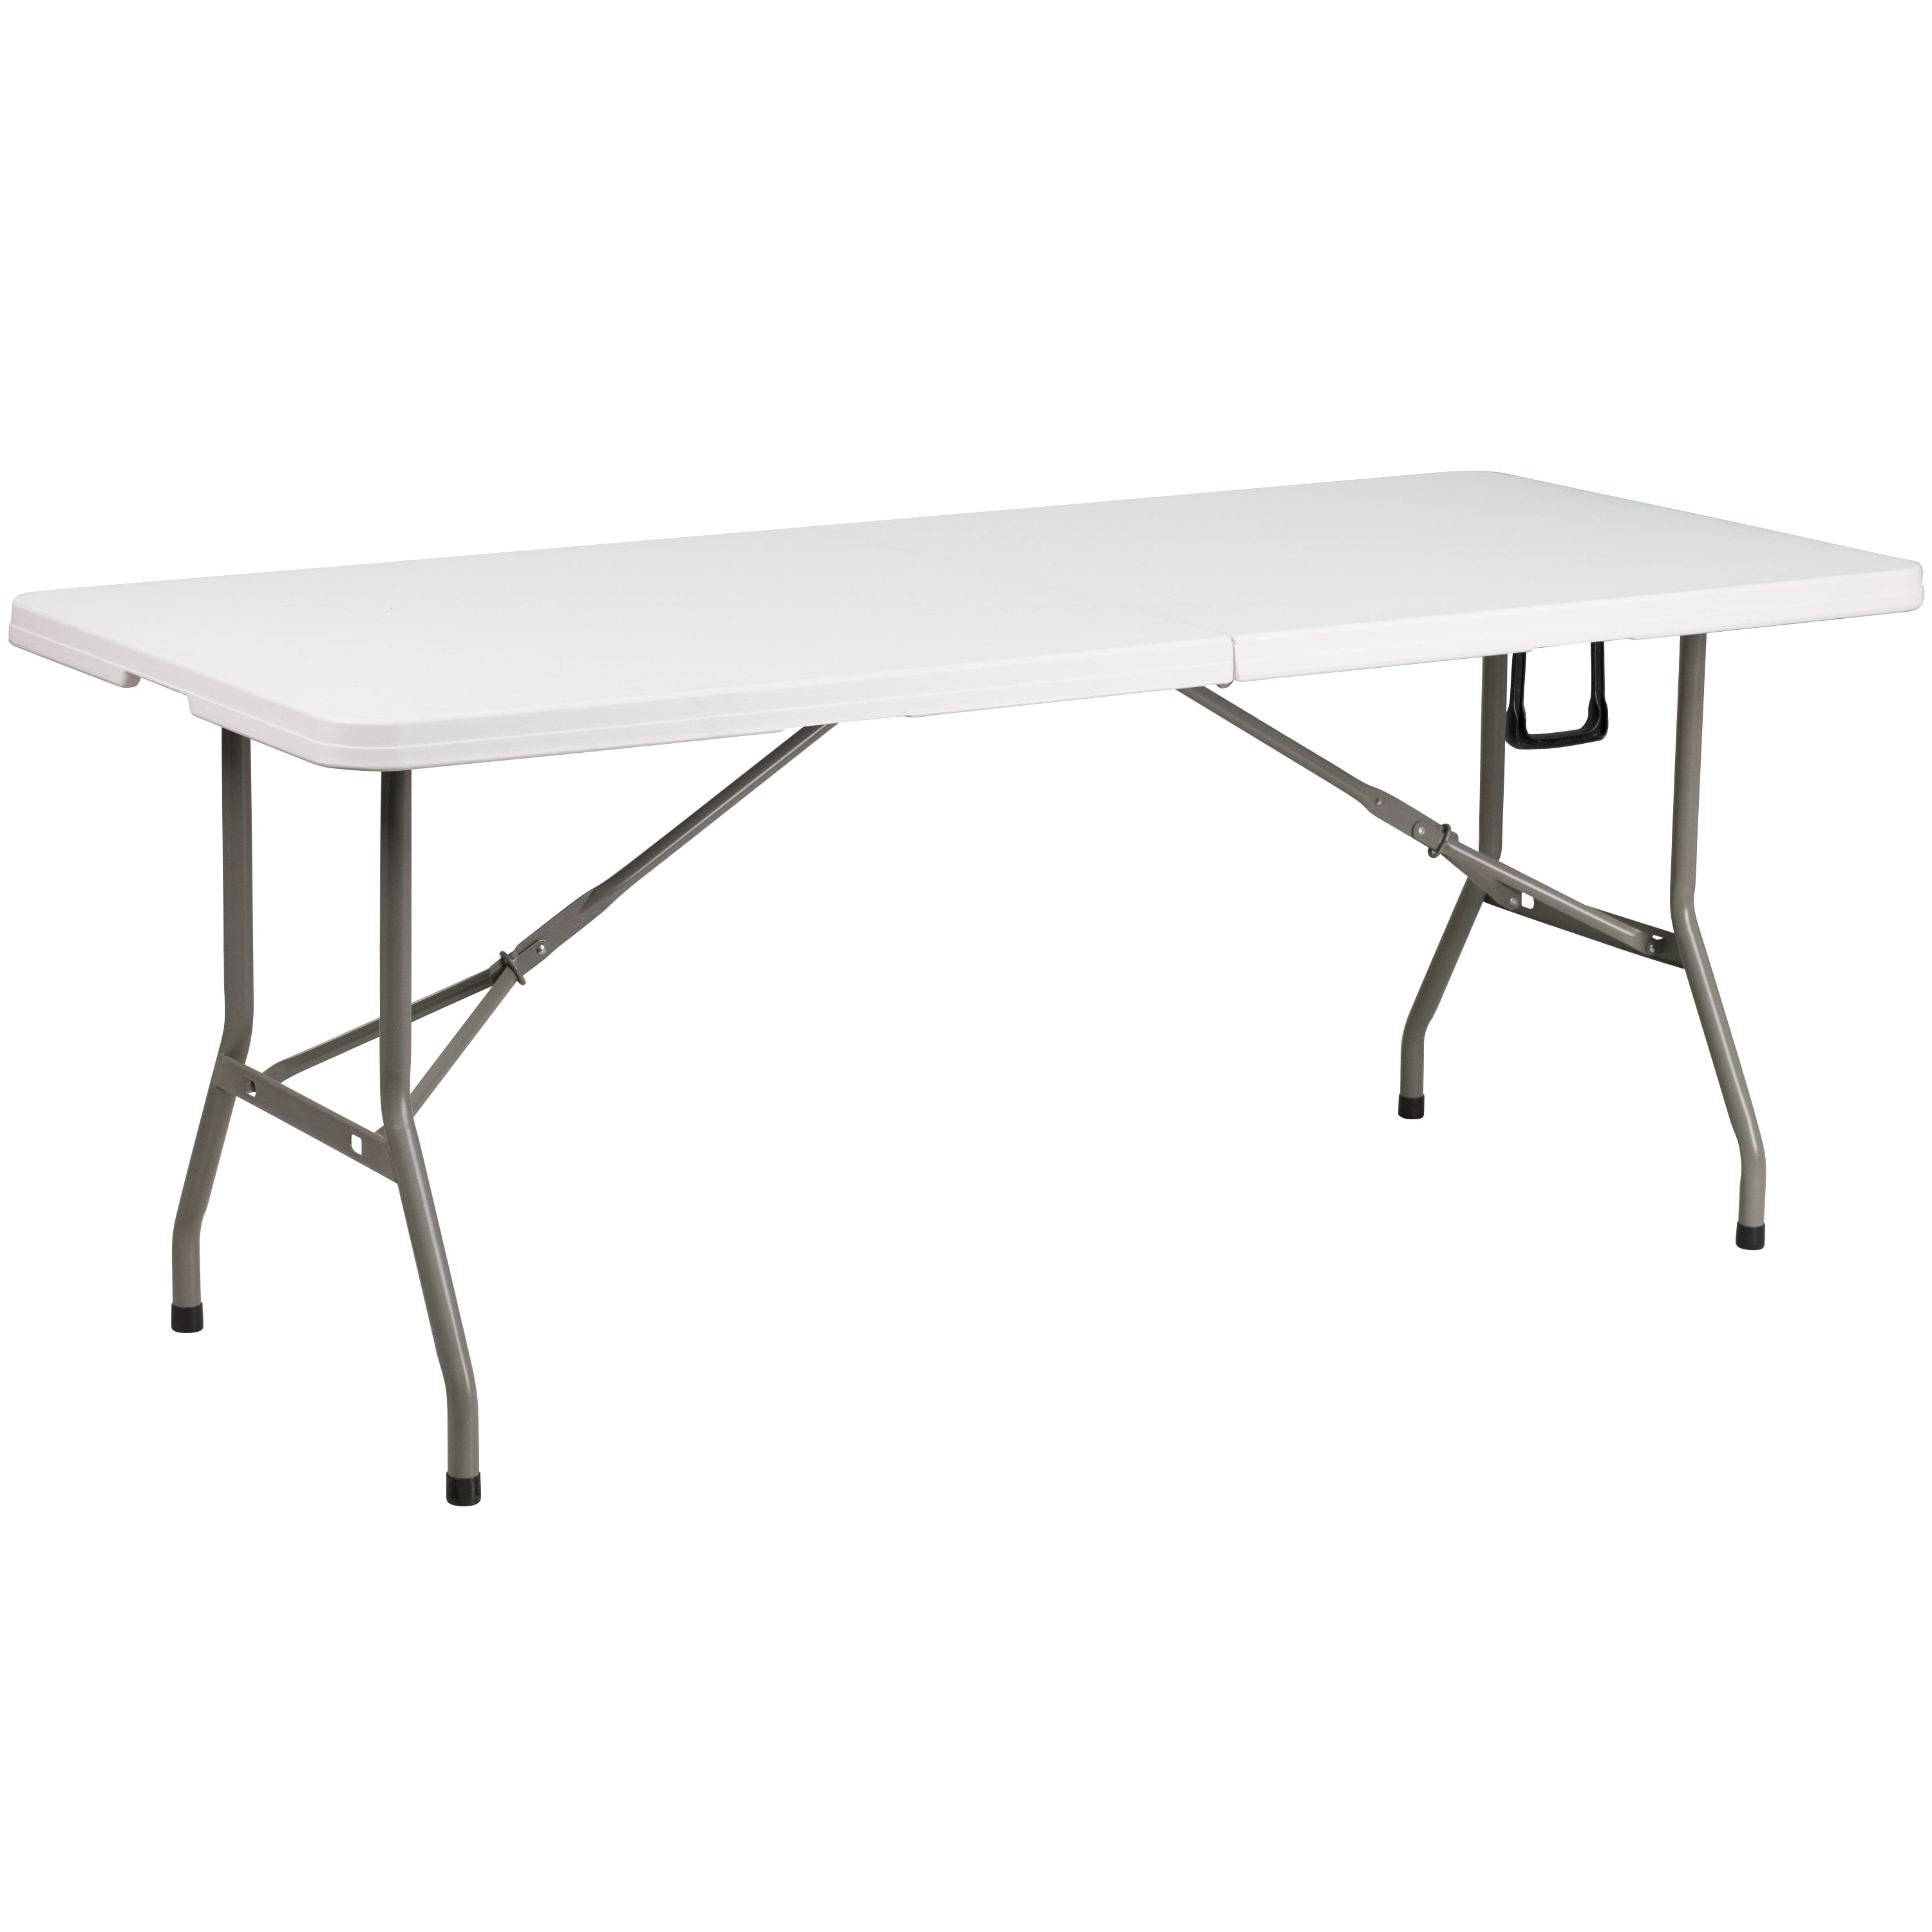 6-Foot Bi-Fold Plastic Banquet and Event Folding Table with Carrying Handle-Rectangular Plastic Folding Table-Flash Furniture-Wall2Wall Furnishings